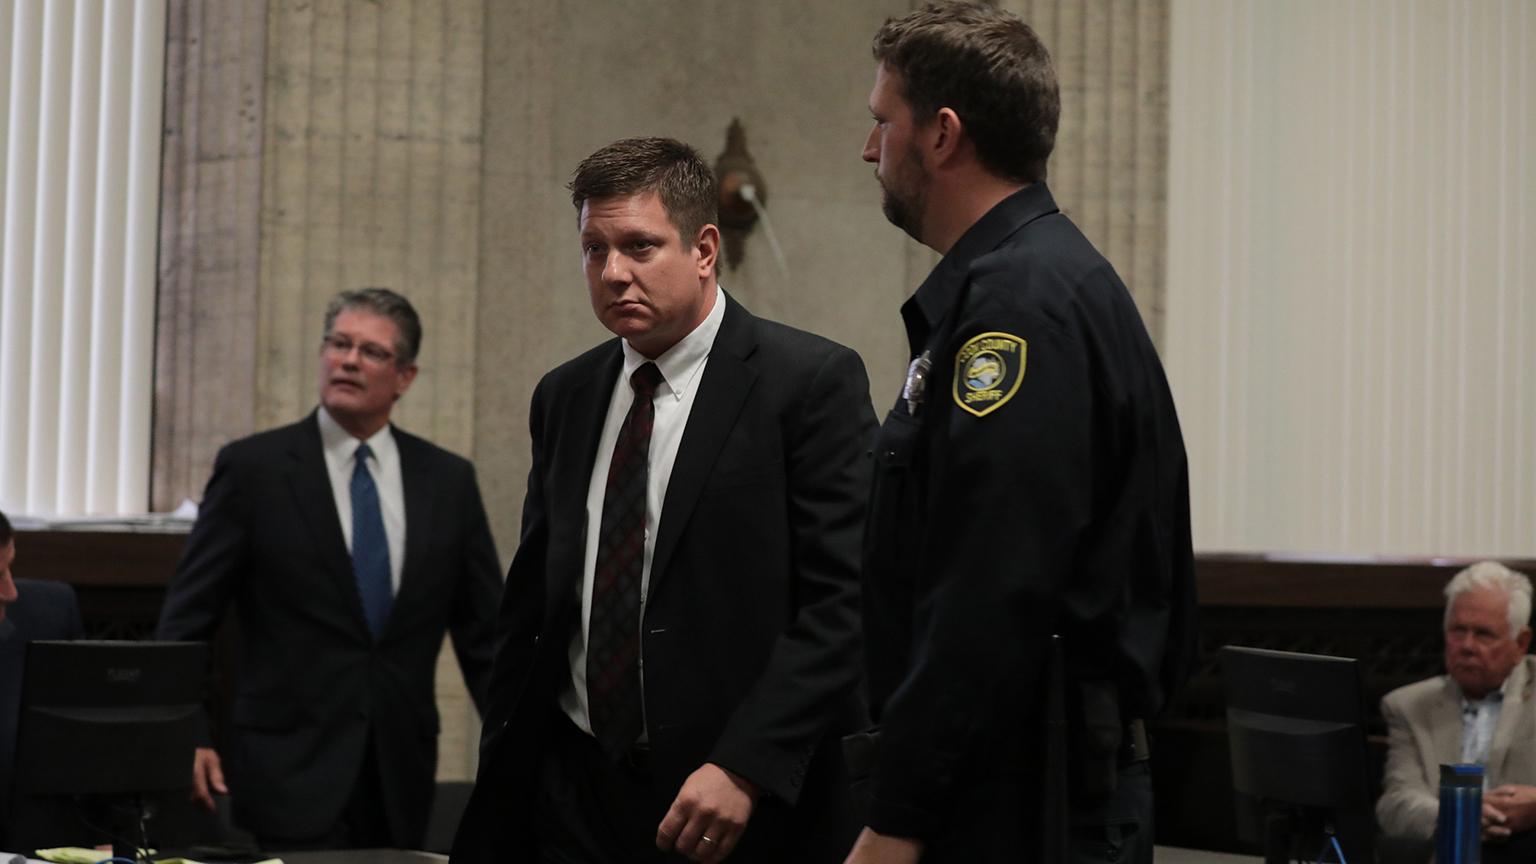 Sheriff’s deputies escort Chicago police Officer Jason Van Dyke from the courtroom Thursday, Sept. 6, 2018, after Judge Vincent Gaughan’s ruling that ordered Van Dyke’s bail be raised only slightly for giving an interview to the Chicago Tribune and a local TV station just days before jury selection was set to begin in his murder trial. (Antonio Perez / Chicago Tribune / Pool)